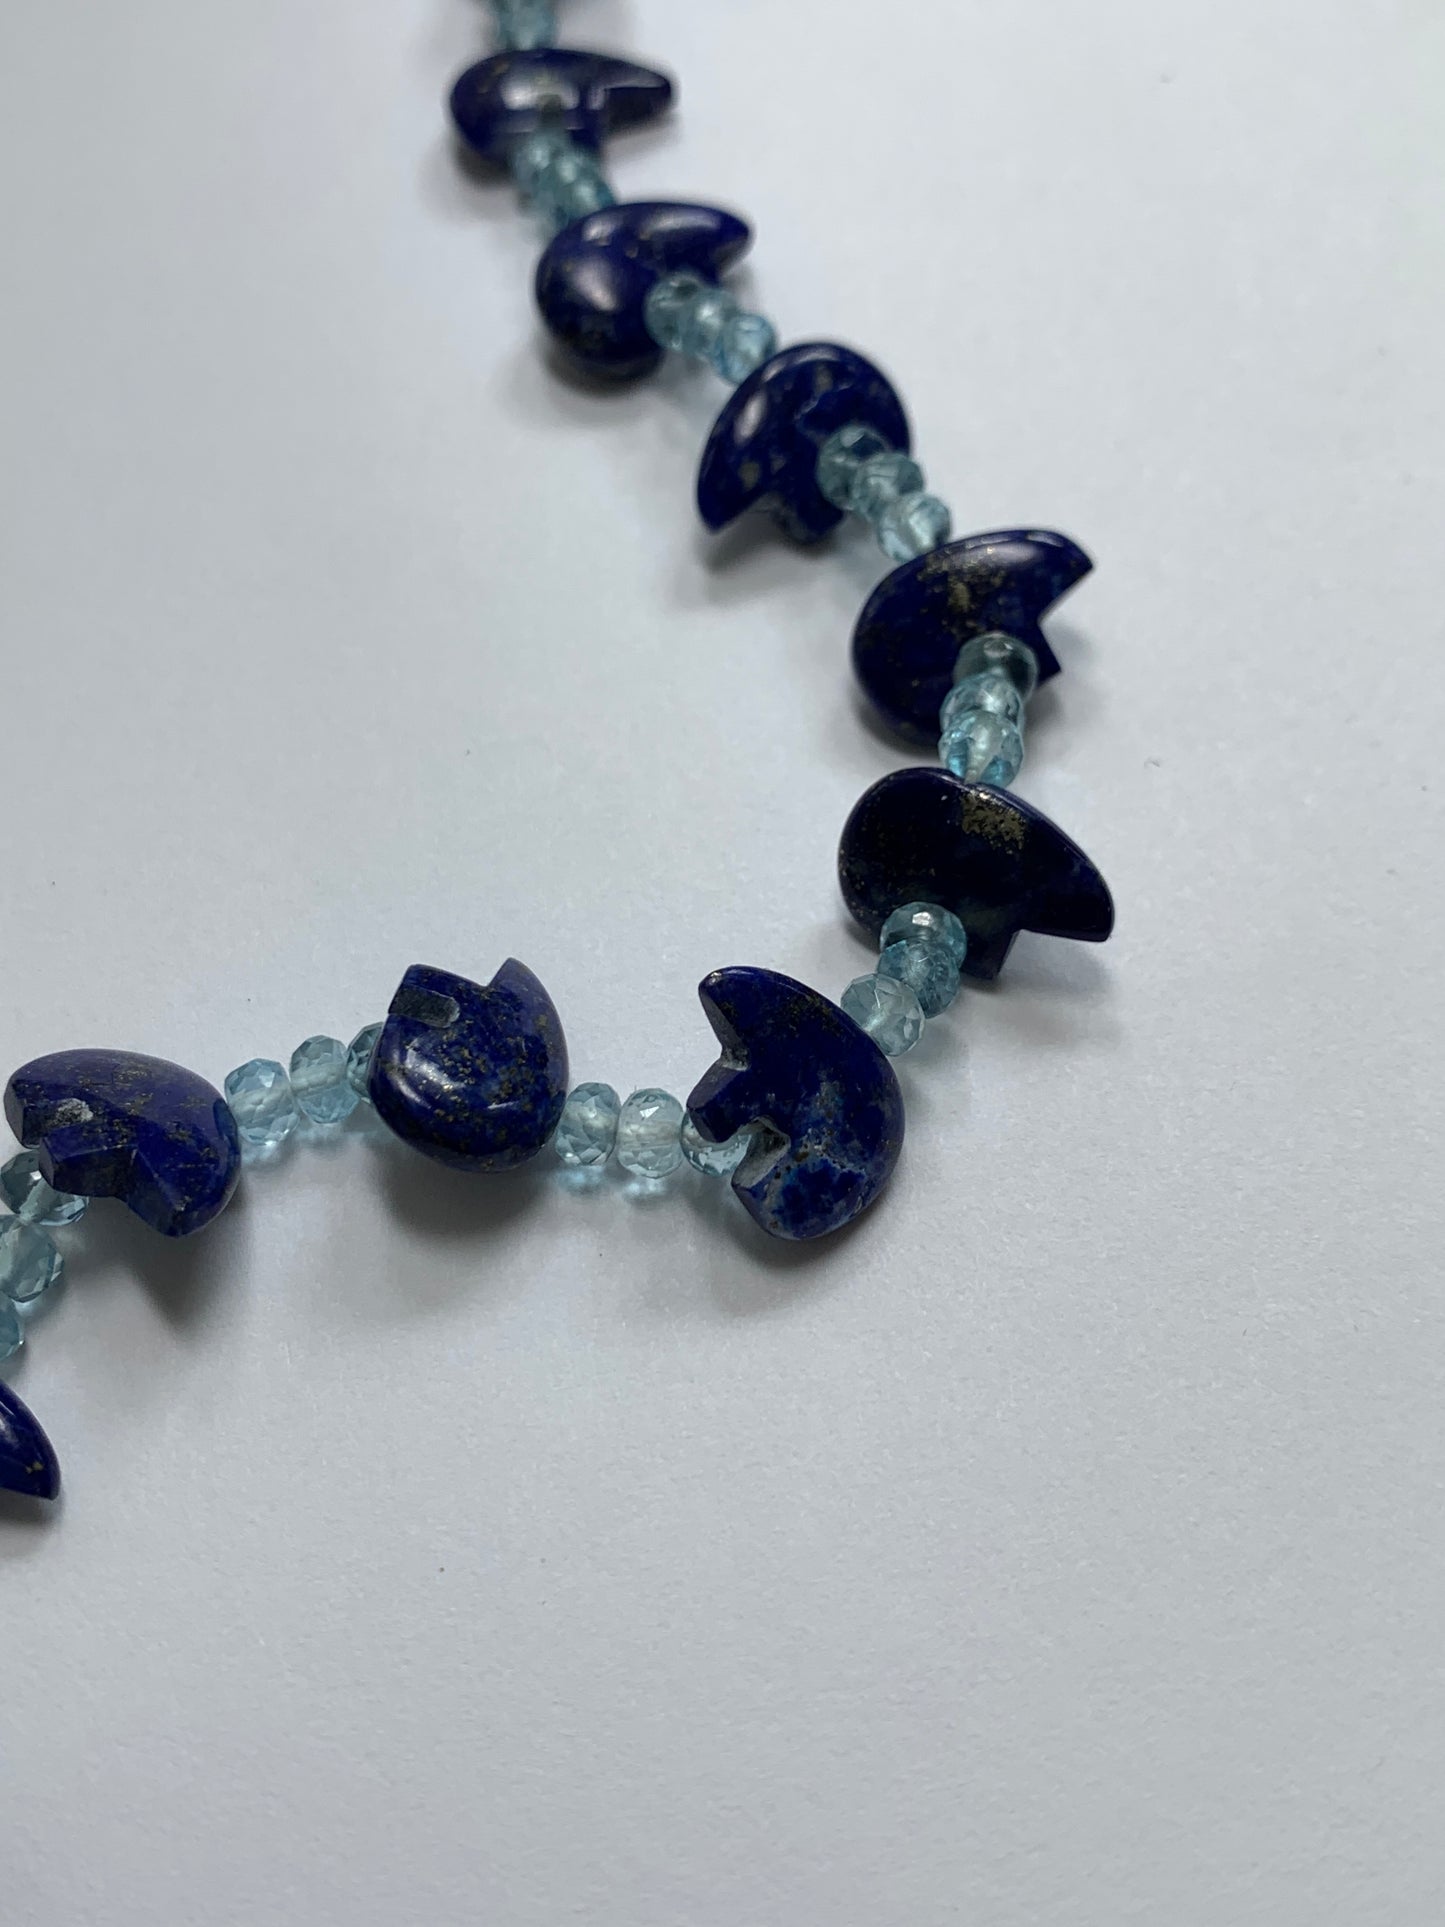 New Fine Blue Lapis Bear Fetishes and Fine Faceted Aquamarine Beads - Knotted Continuous Necklace - by Jenn Dewey